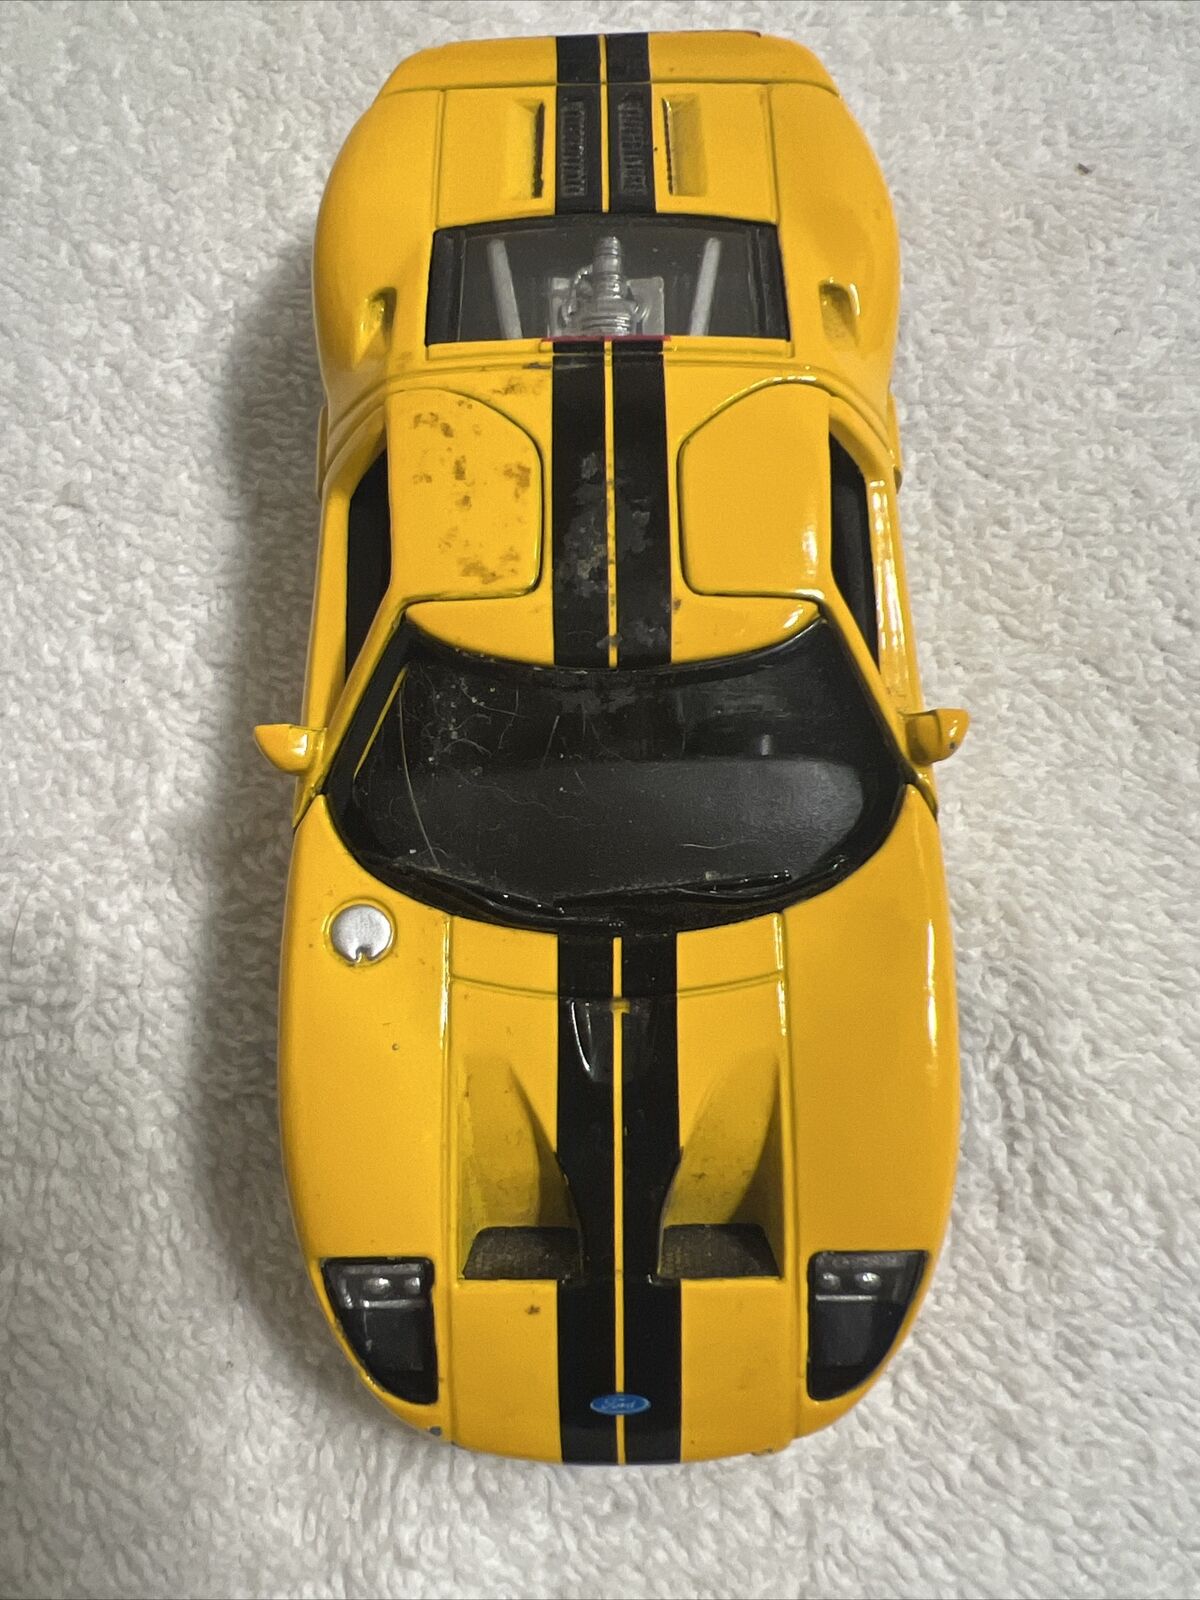     Ford-GT 1-36-scale KT.5092 Yellow